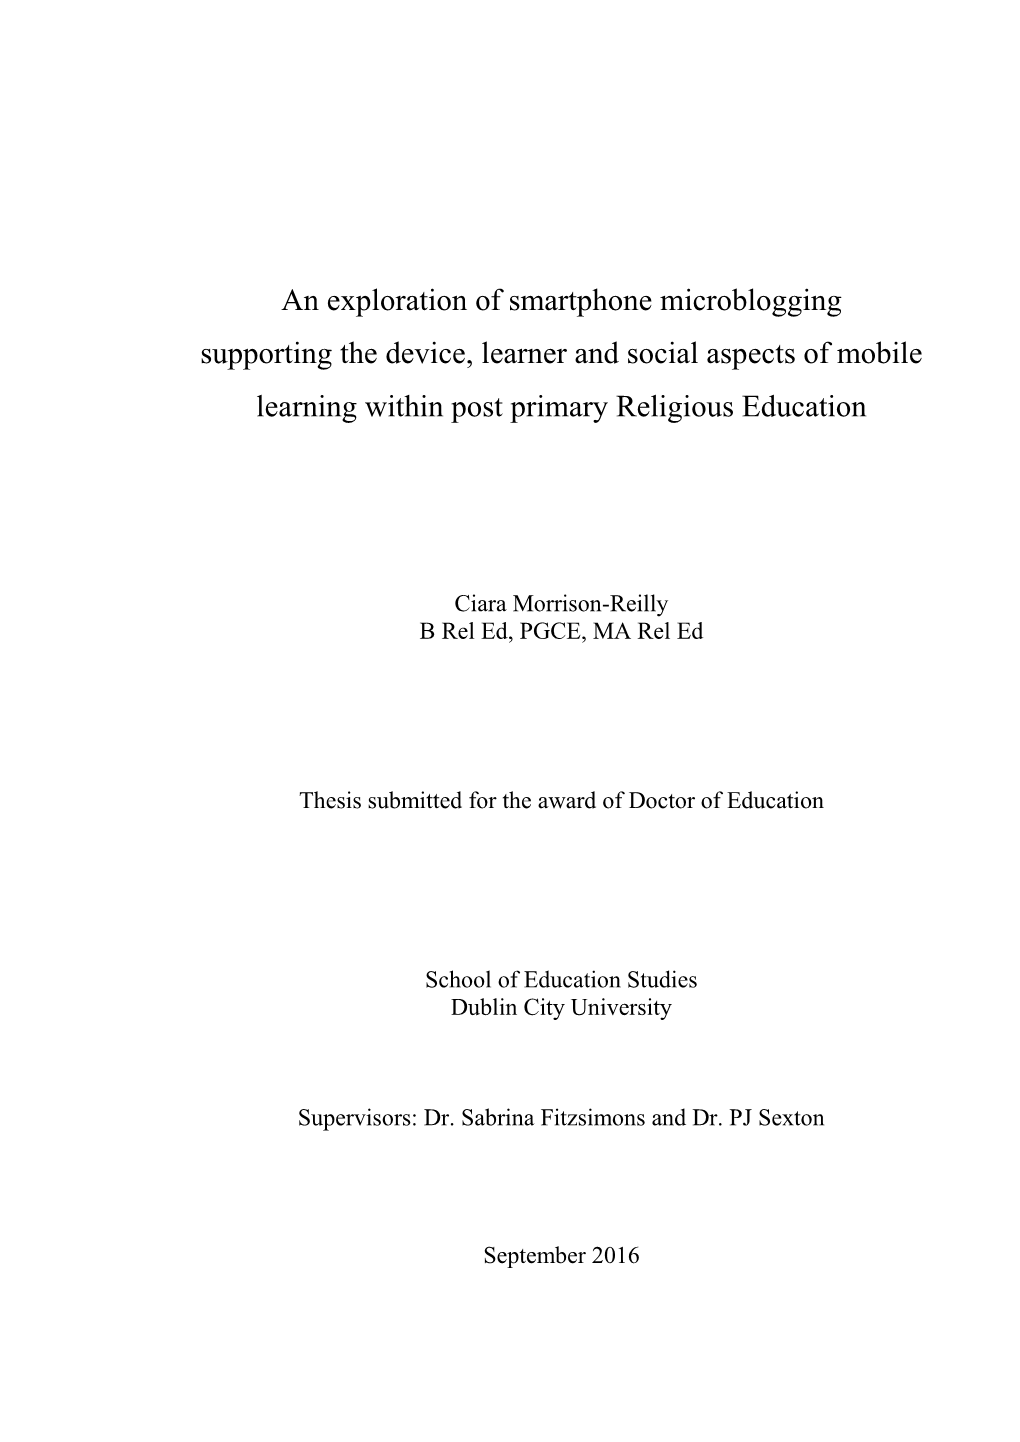 PDF (Thesis Submitted for the Award of Doctor of Education)